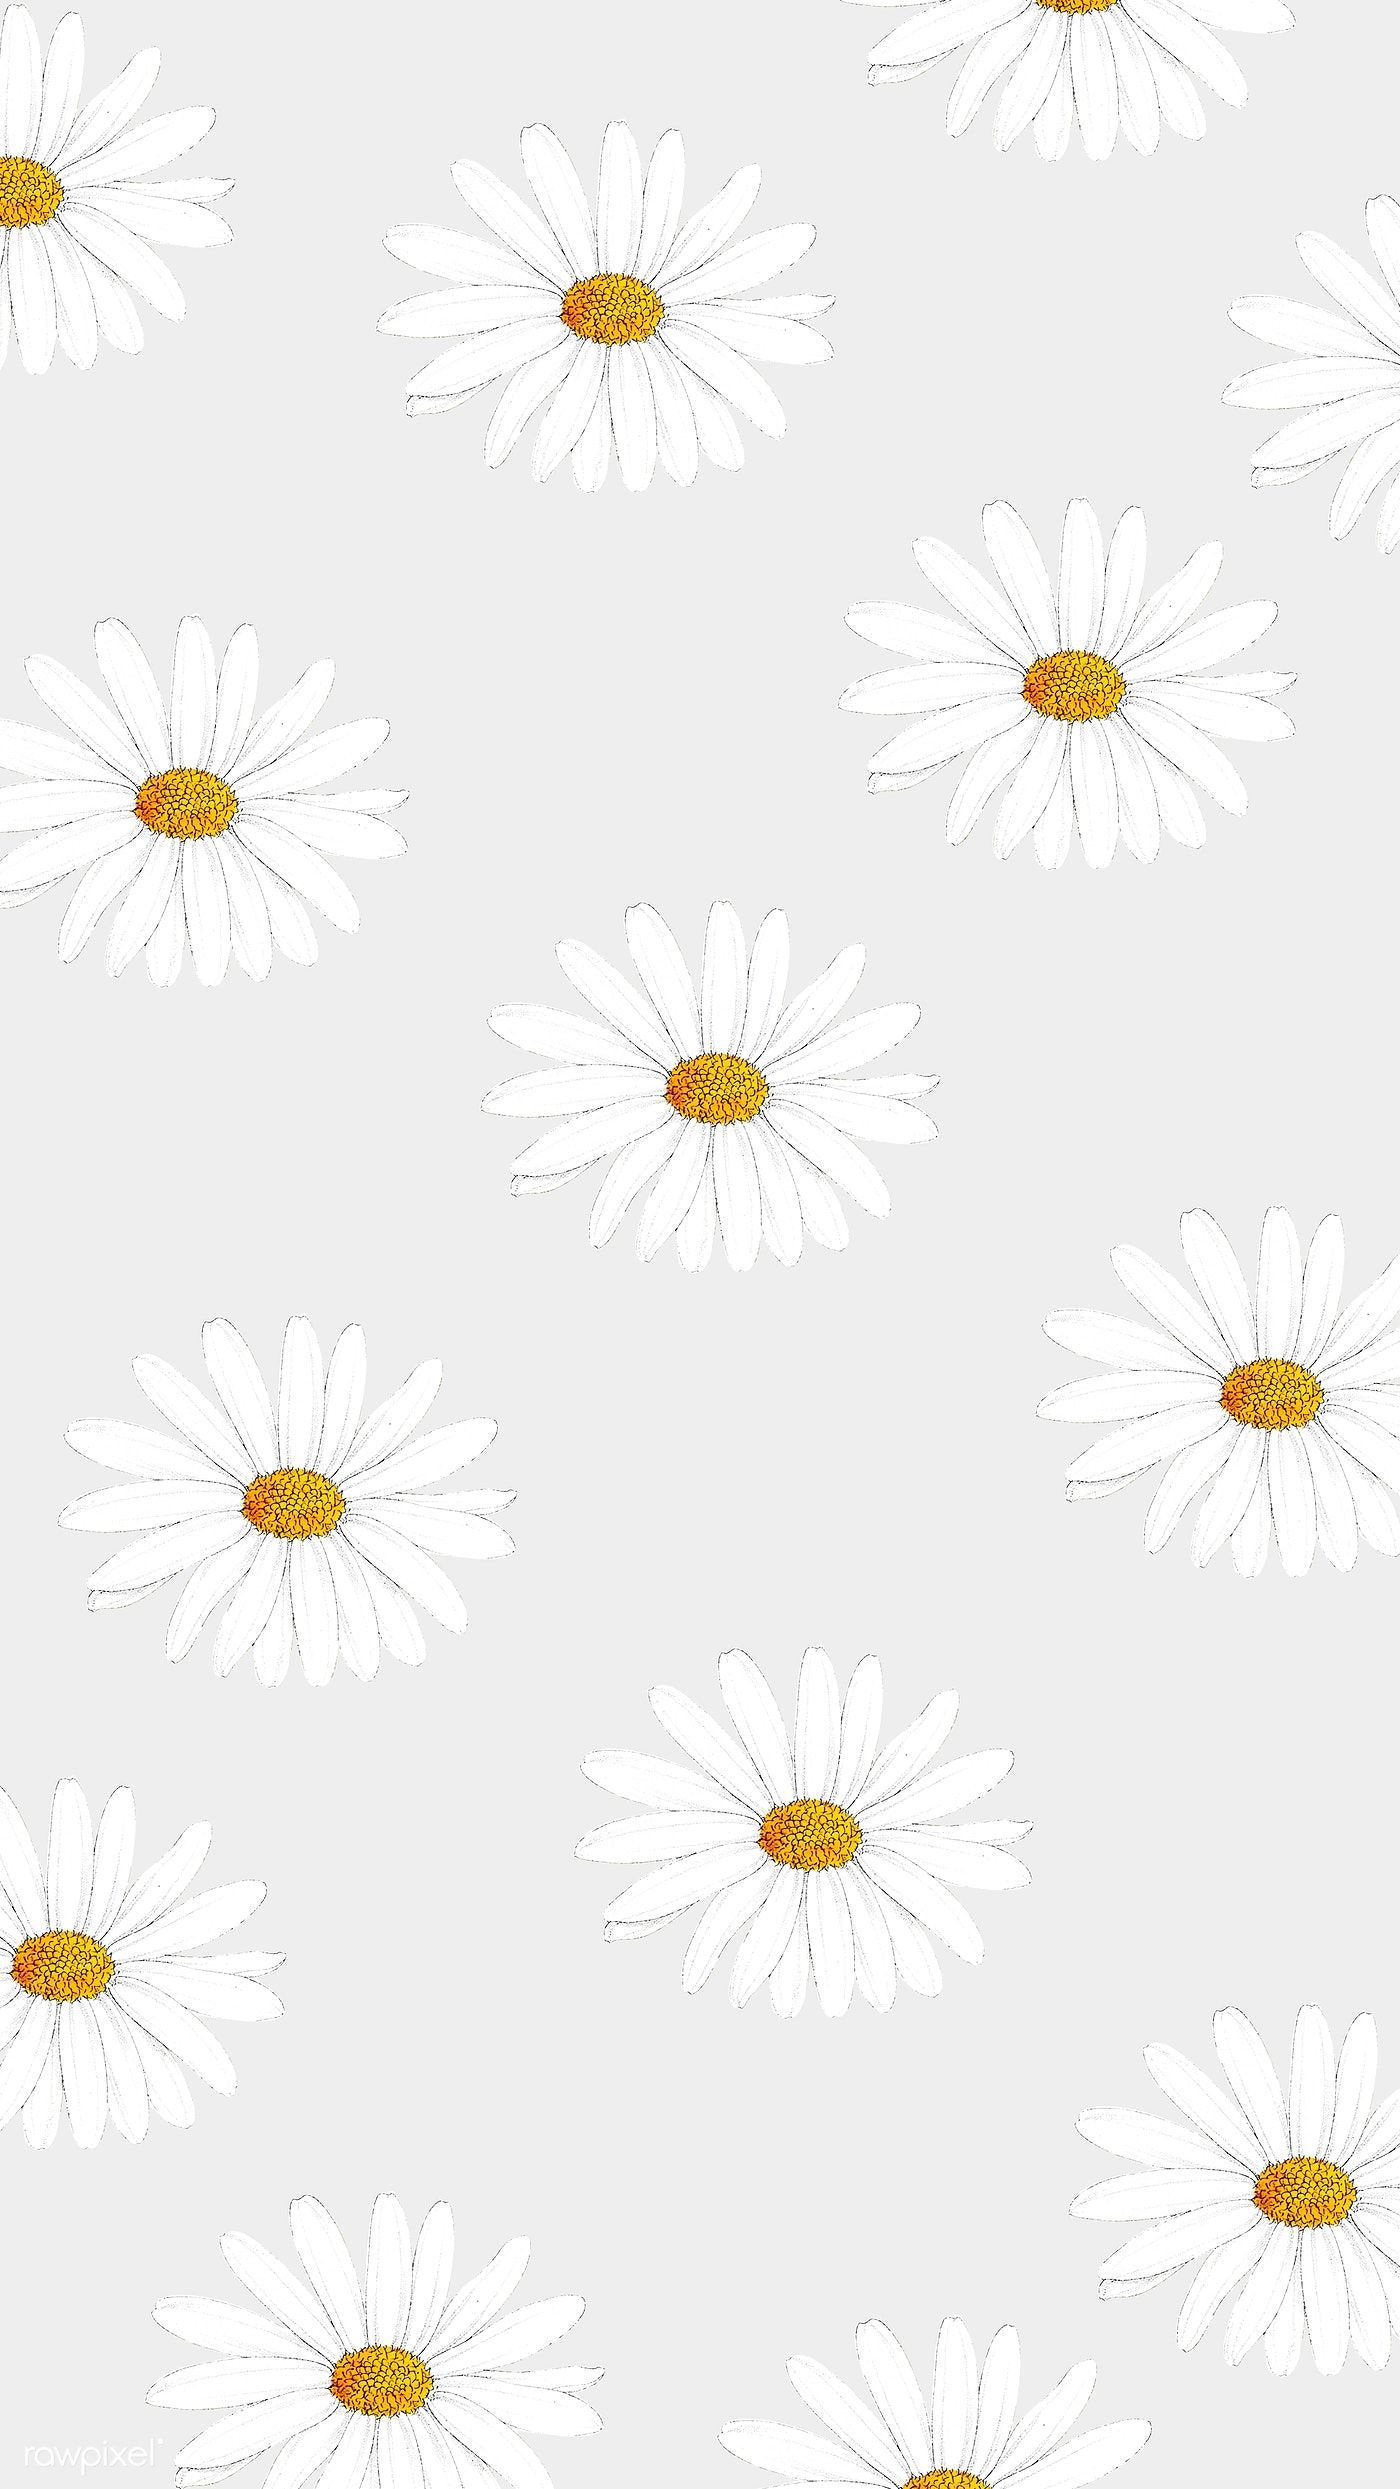 Daisy Aesthetic Wallpapers Daisy Aesthetic Wallpapers Ghatrisate